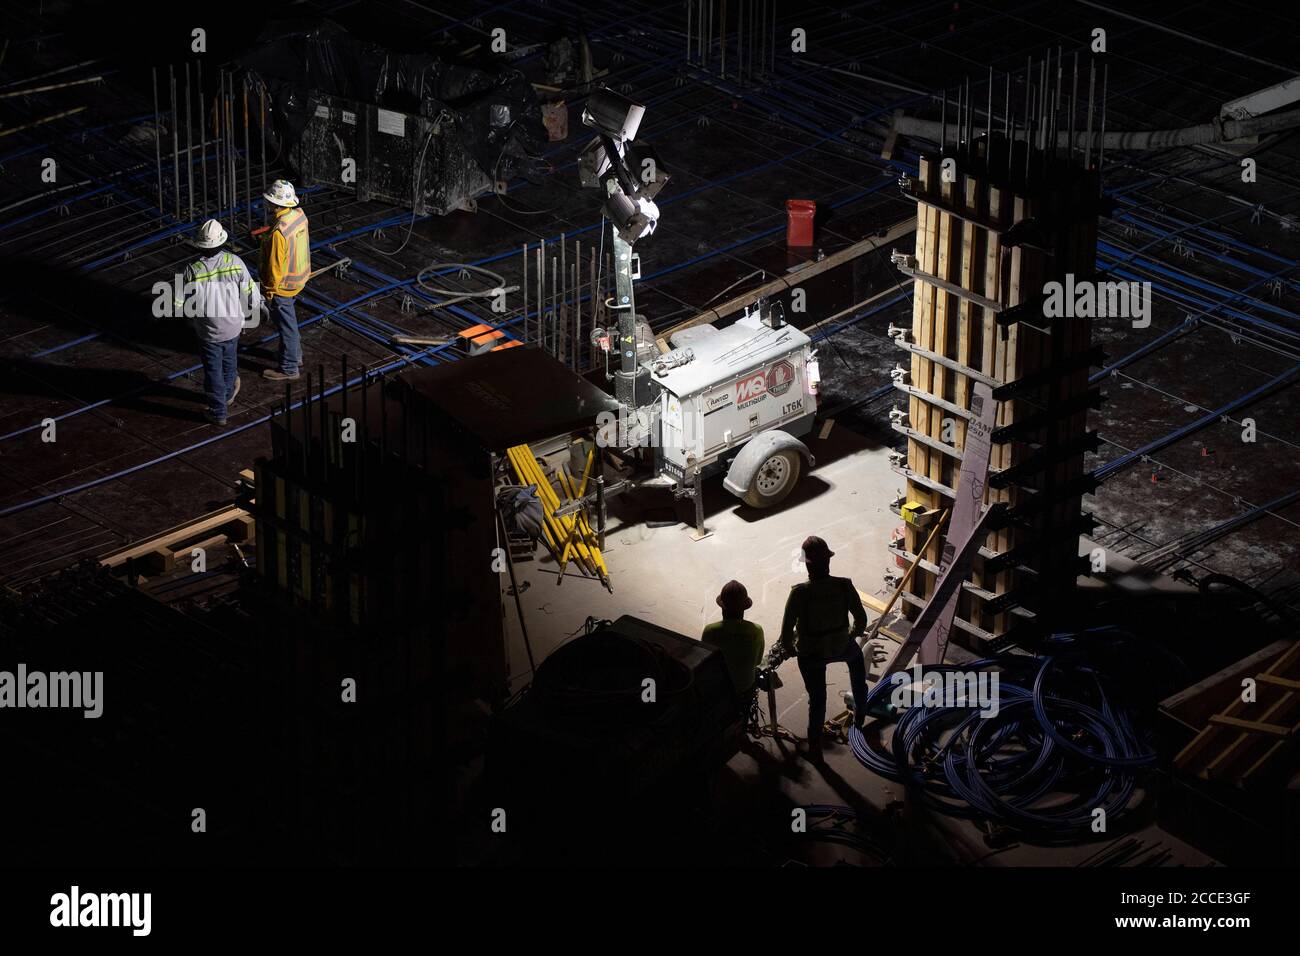 Austin, TX USA July 25, 2020: A generator-powered spotlight shines on concrete crews working on the parking garage of a 53-story building during a night-time pour in downtown Austin, TX. Huge construction projects continue unabated in Texas despite the nationwide COVID-19 pandemic and the state stricken with over a half million cases and 10,000-plus deaths. Stock Photo